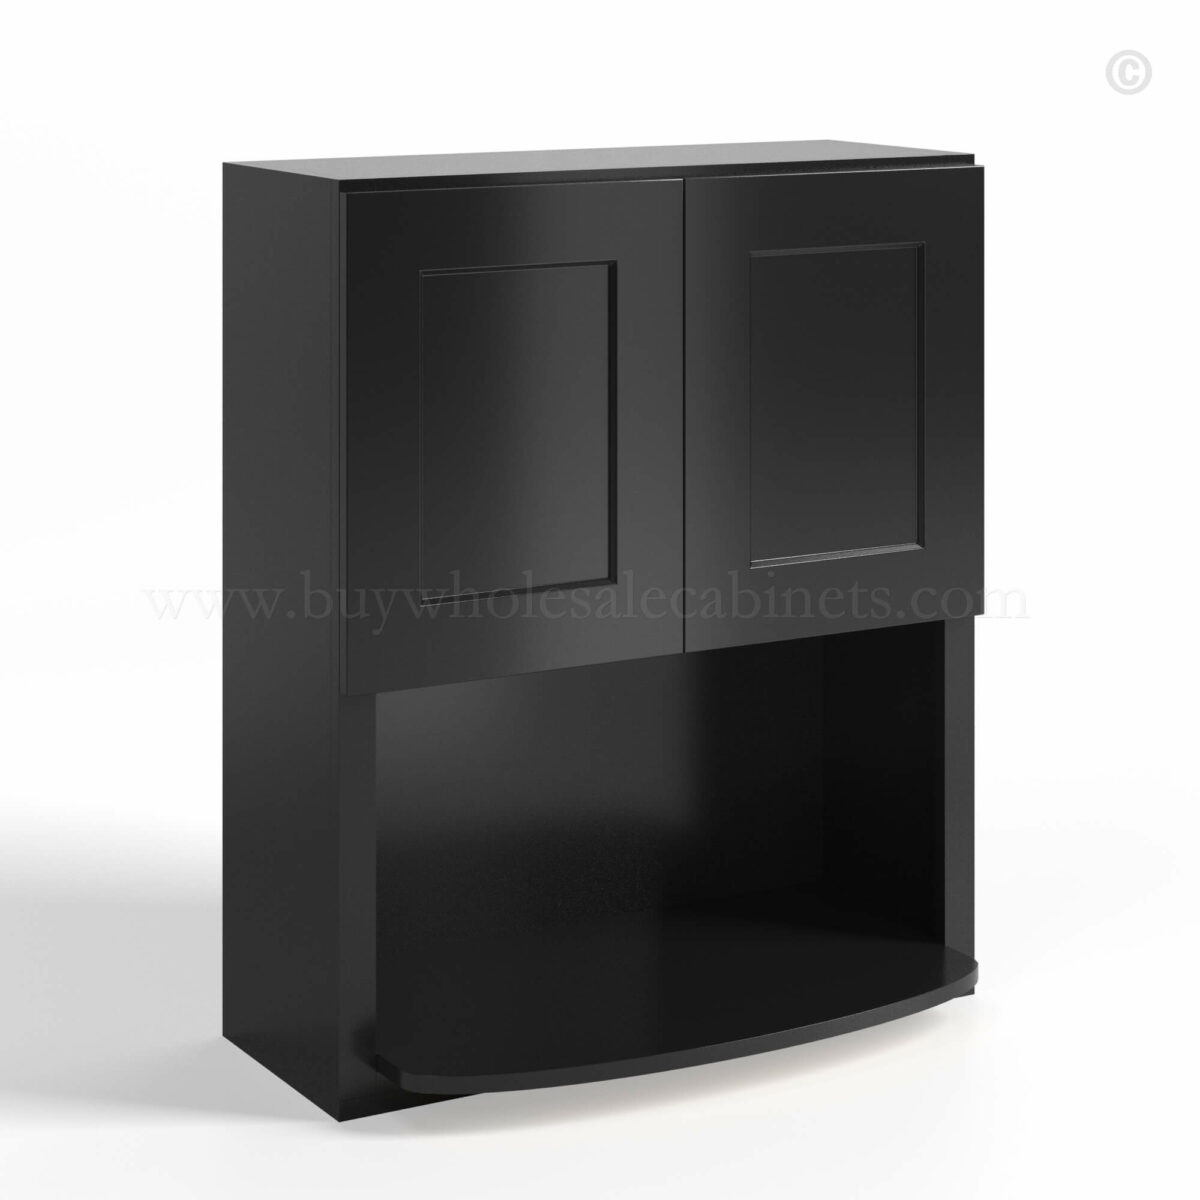 Black Shaker Wall Microwave Cabinet